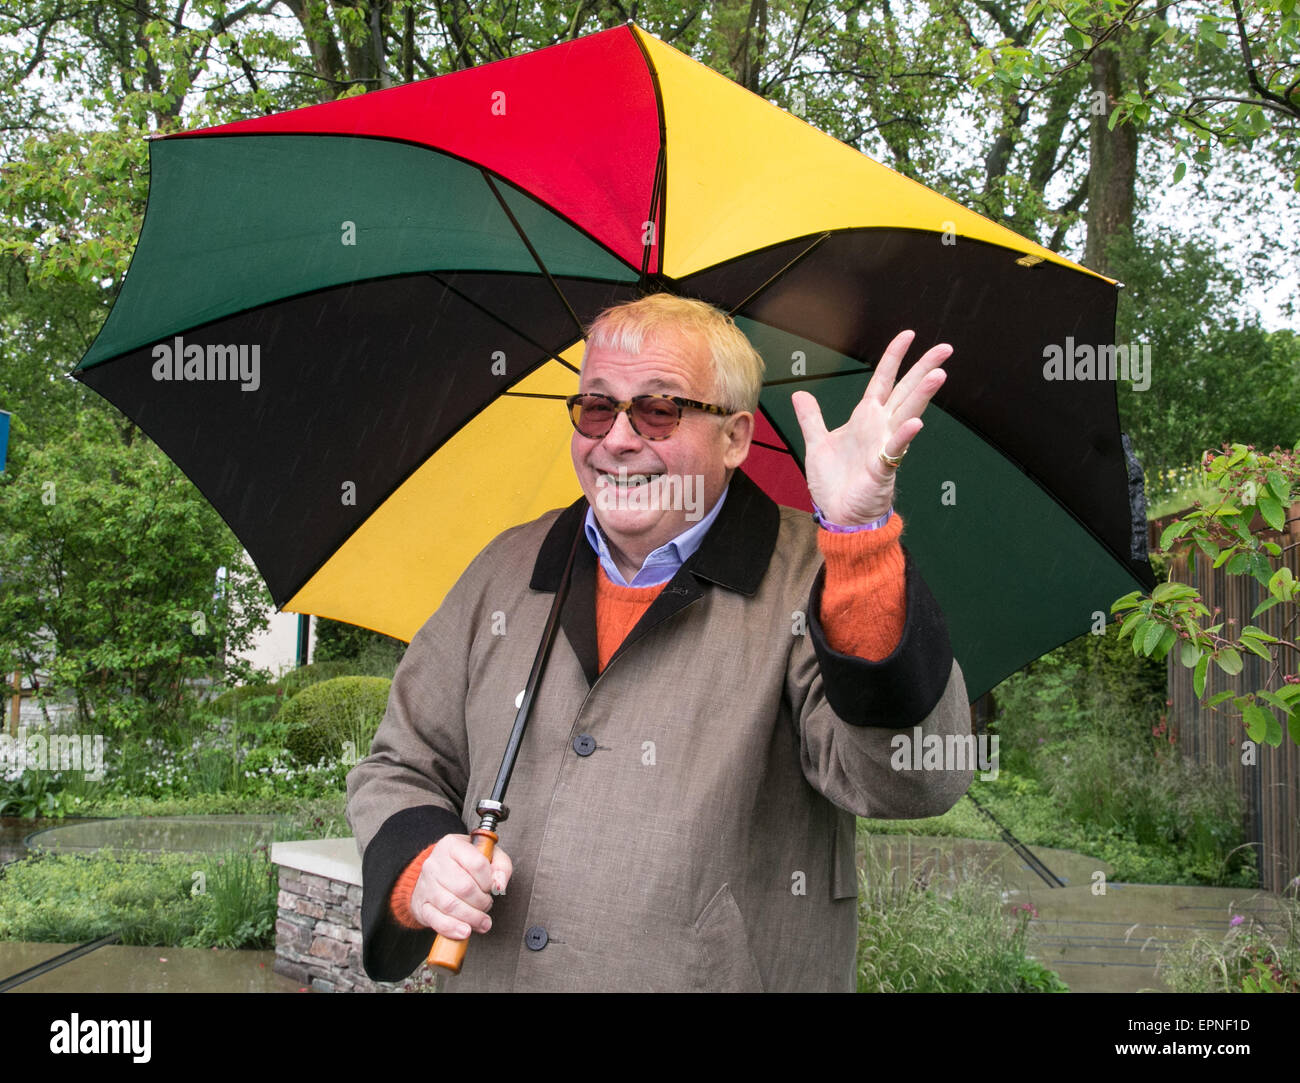 Christopher Biggins,actor and comedian at the RHS Chelsea Flower Show 2015 Stock Photo